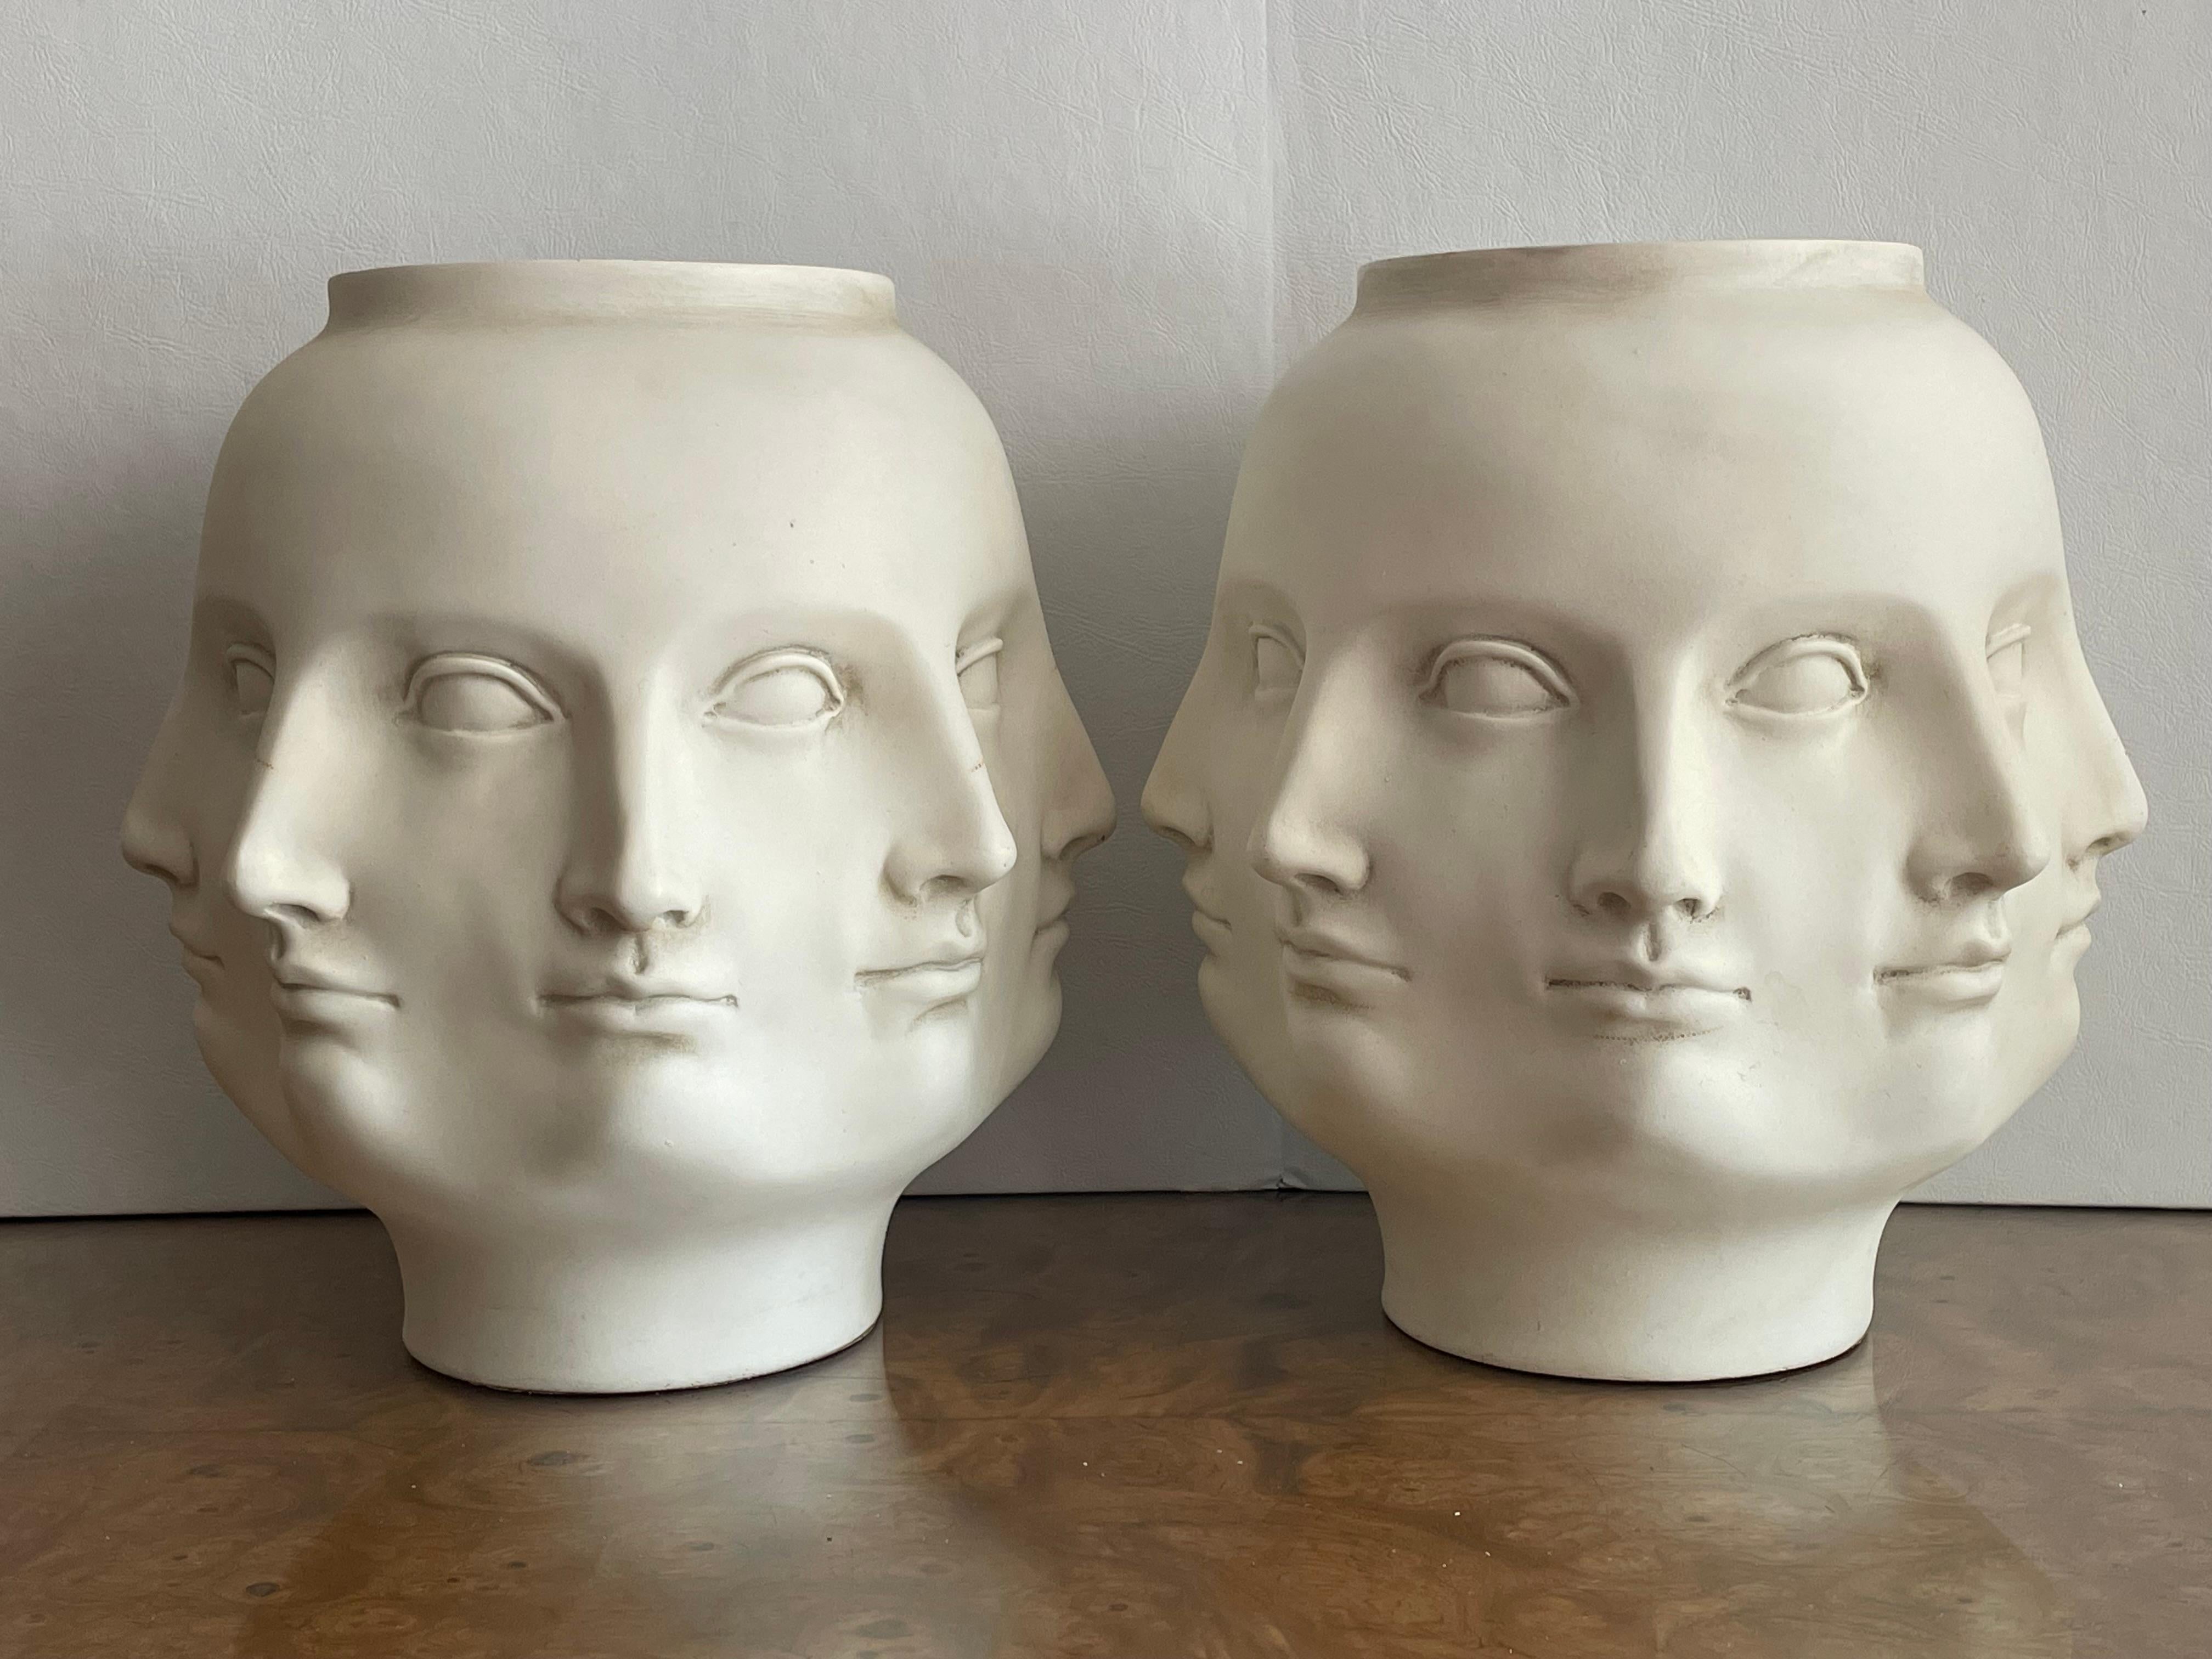 Pair of TMS Inc Multi face vases 
VITRUVIAN COLLECTION
Each artistic design expresses the harmonization of the relationship between parts of the body which manifest themselves in beauty.
For centuries, artists have studied, admired and sculpted the